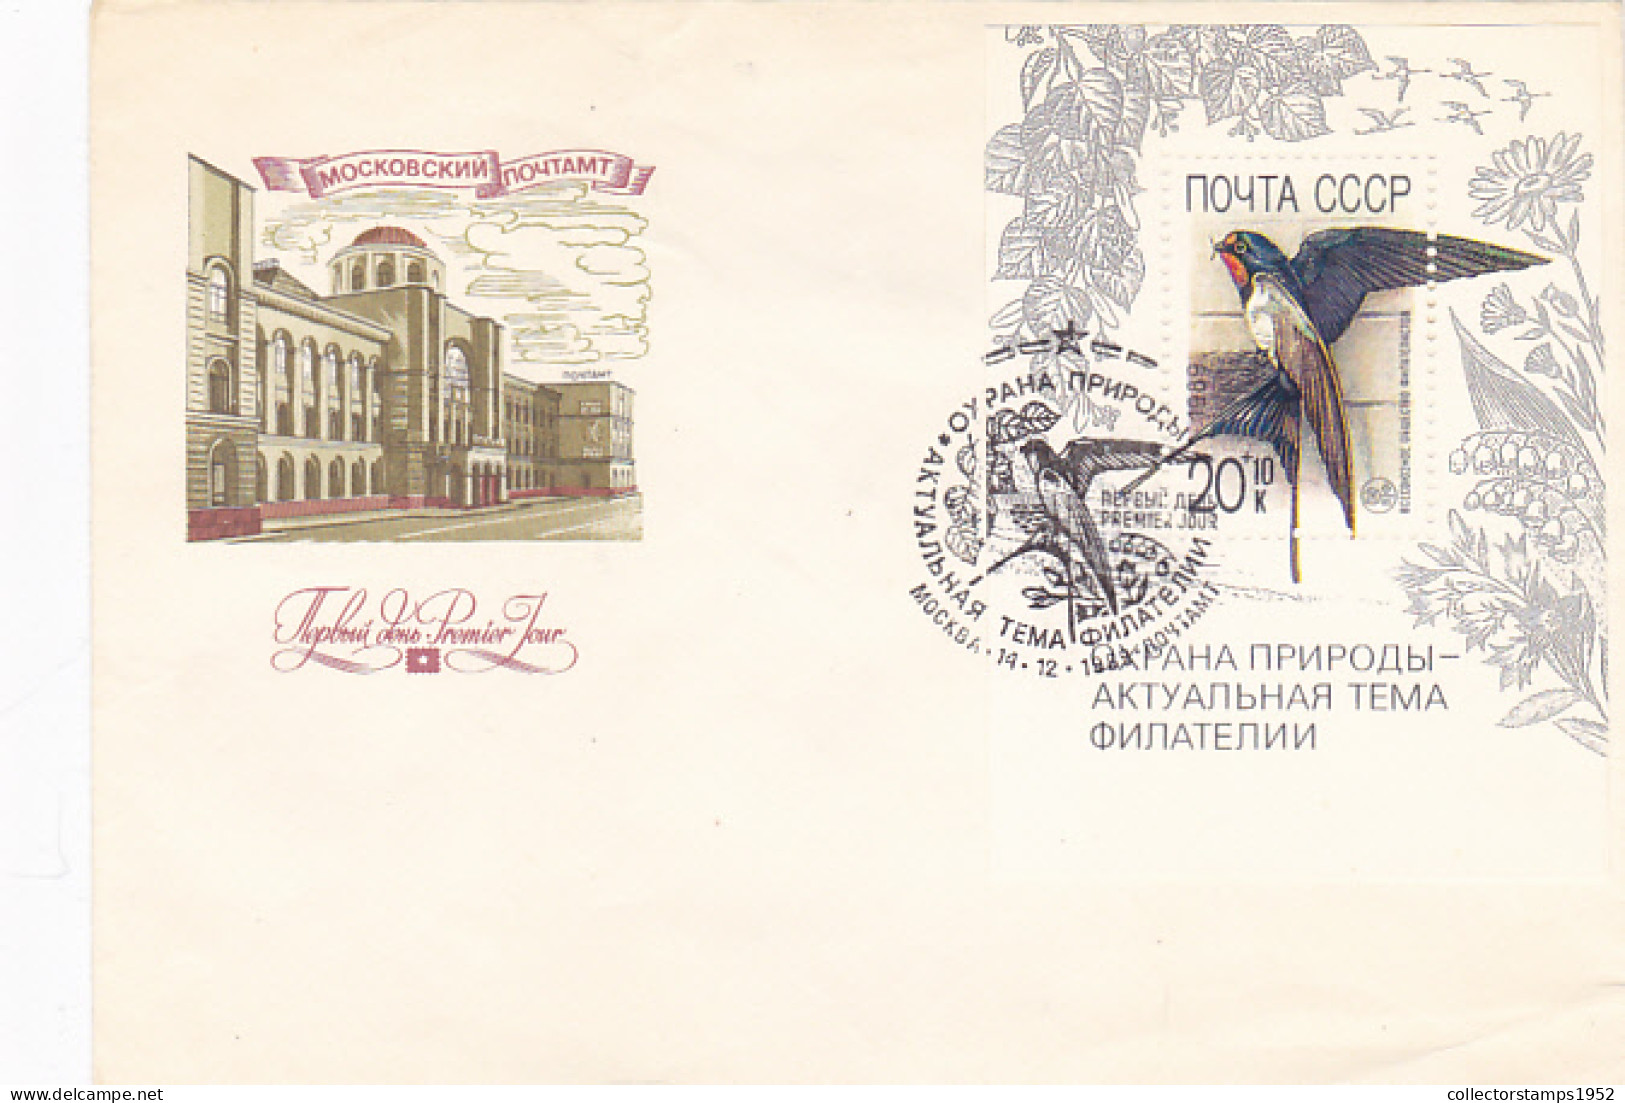 SWALLOW, BIRDS, ANIMALS, SPECIAL POSTMARK AND STAMP SHEET ON MOSCOW POST OFFICE COVER FDC, 1989, RUSSIA-USSR - Zwaluwen